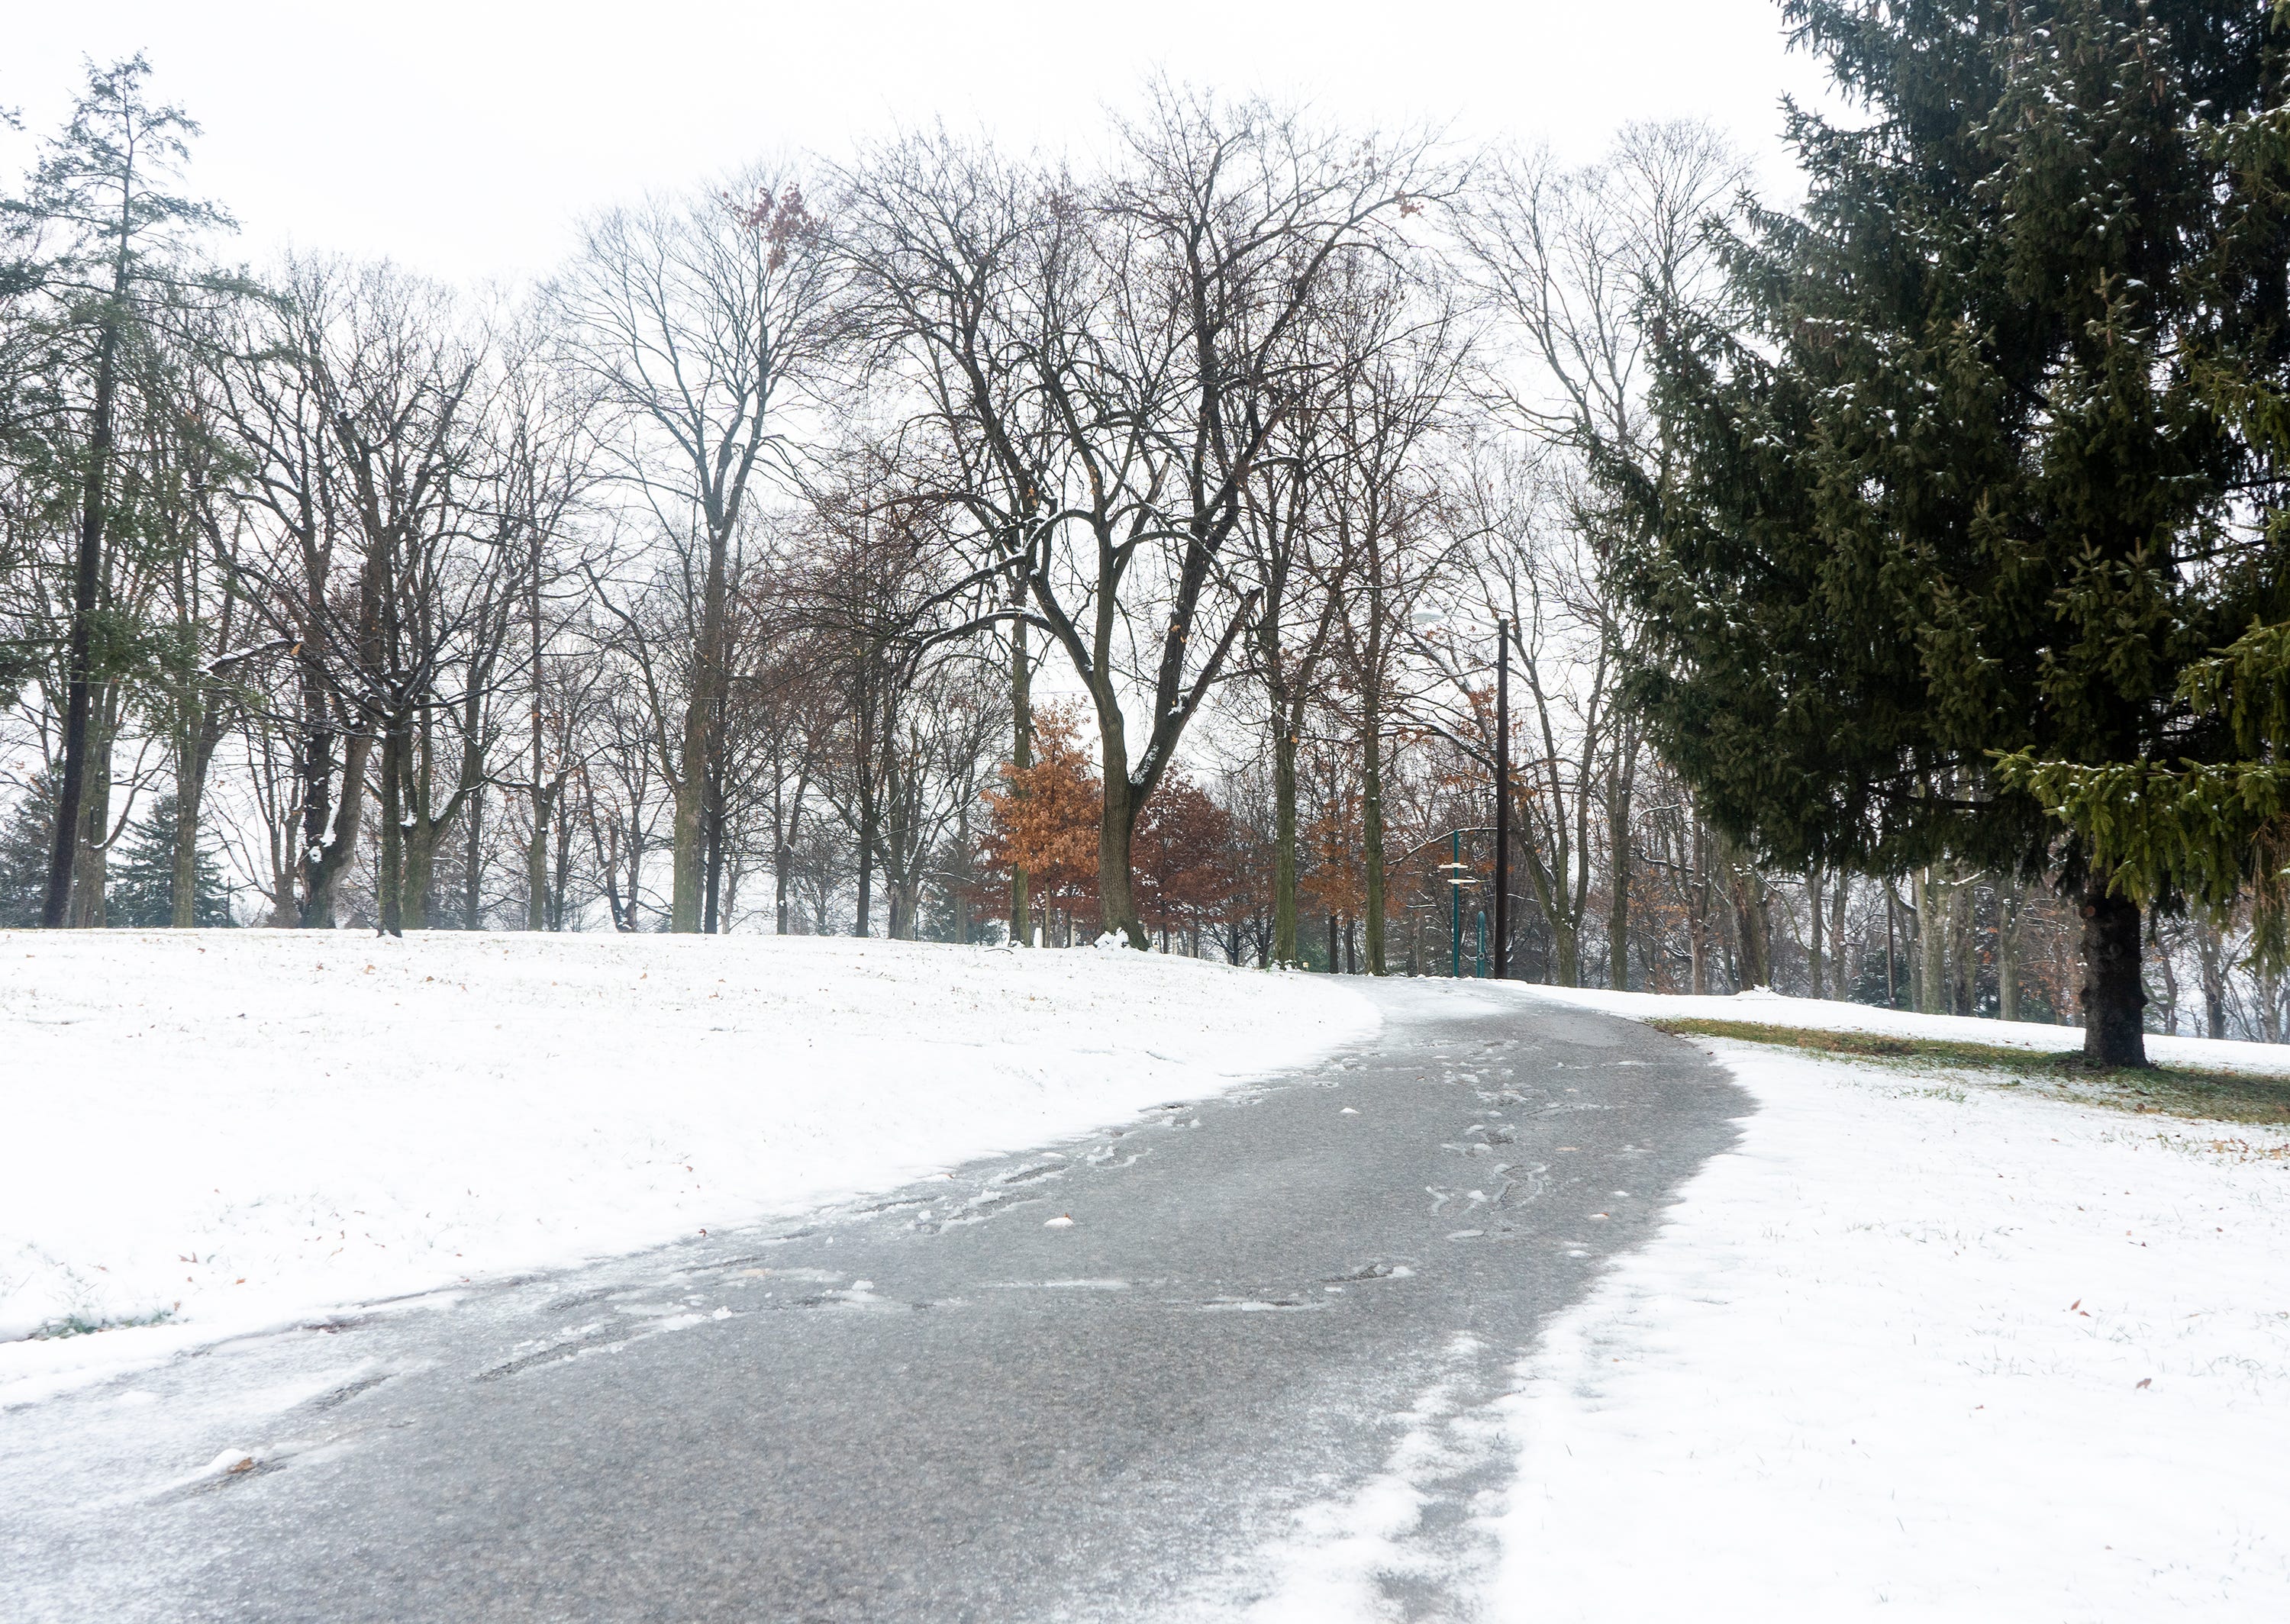 Snow turned to slush at Farquhar Park in York on Wednesday, Jan. 25, 2023.